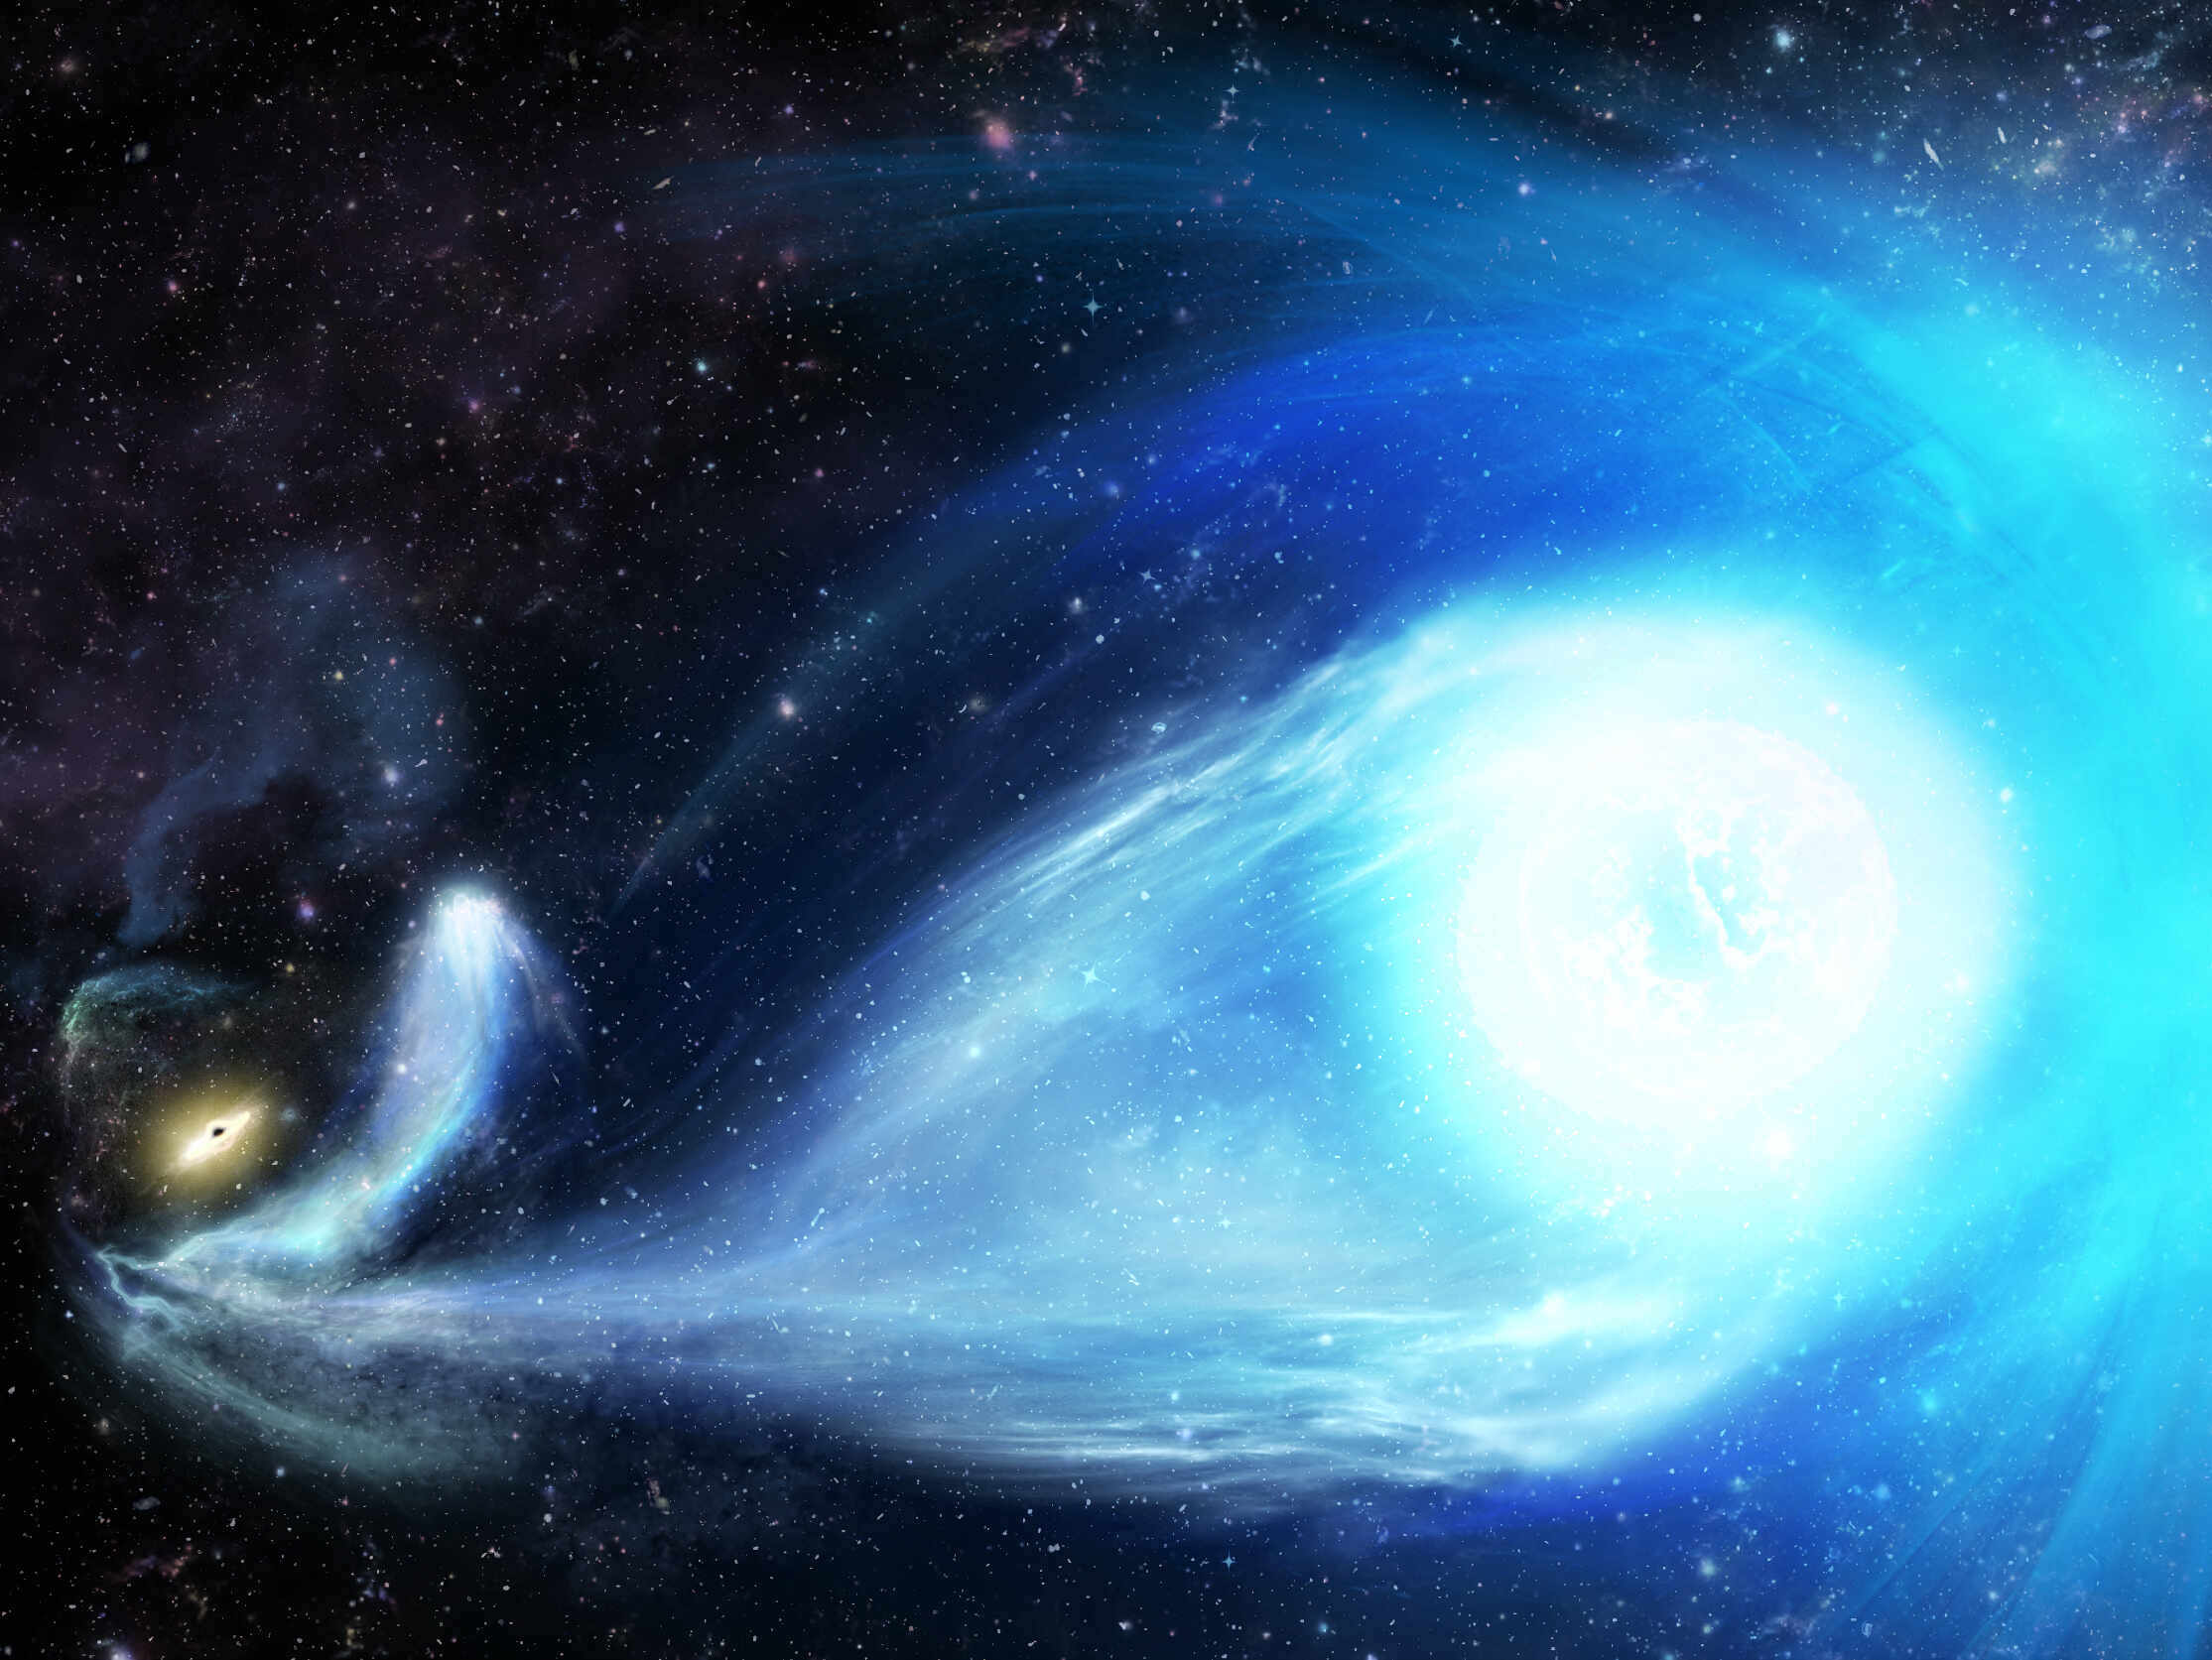 An artist’s impression of S⁵-HVS1’s ejection by Sagittarius A*, the black hole at the center of the Galaxy. The black hole and the captured binary partner to S⁵-HVS1 are seen far away in the left corner of the picture, while S⁵-HVS1 is in the foreground, speeding away from them. <br/><br/>(Credit: James Josephides • Swinburne Astronomy Productions)